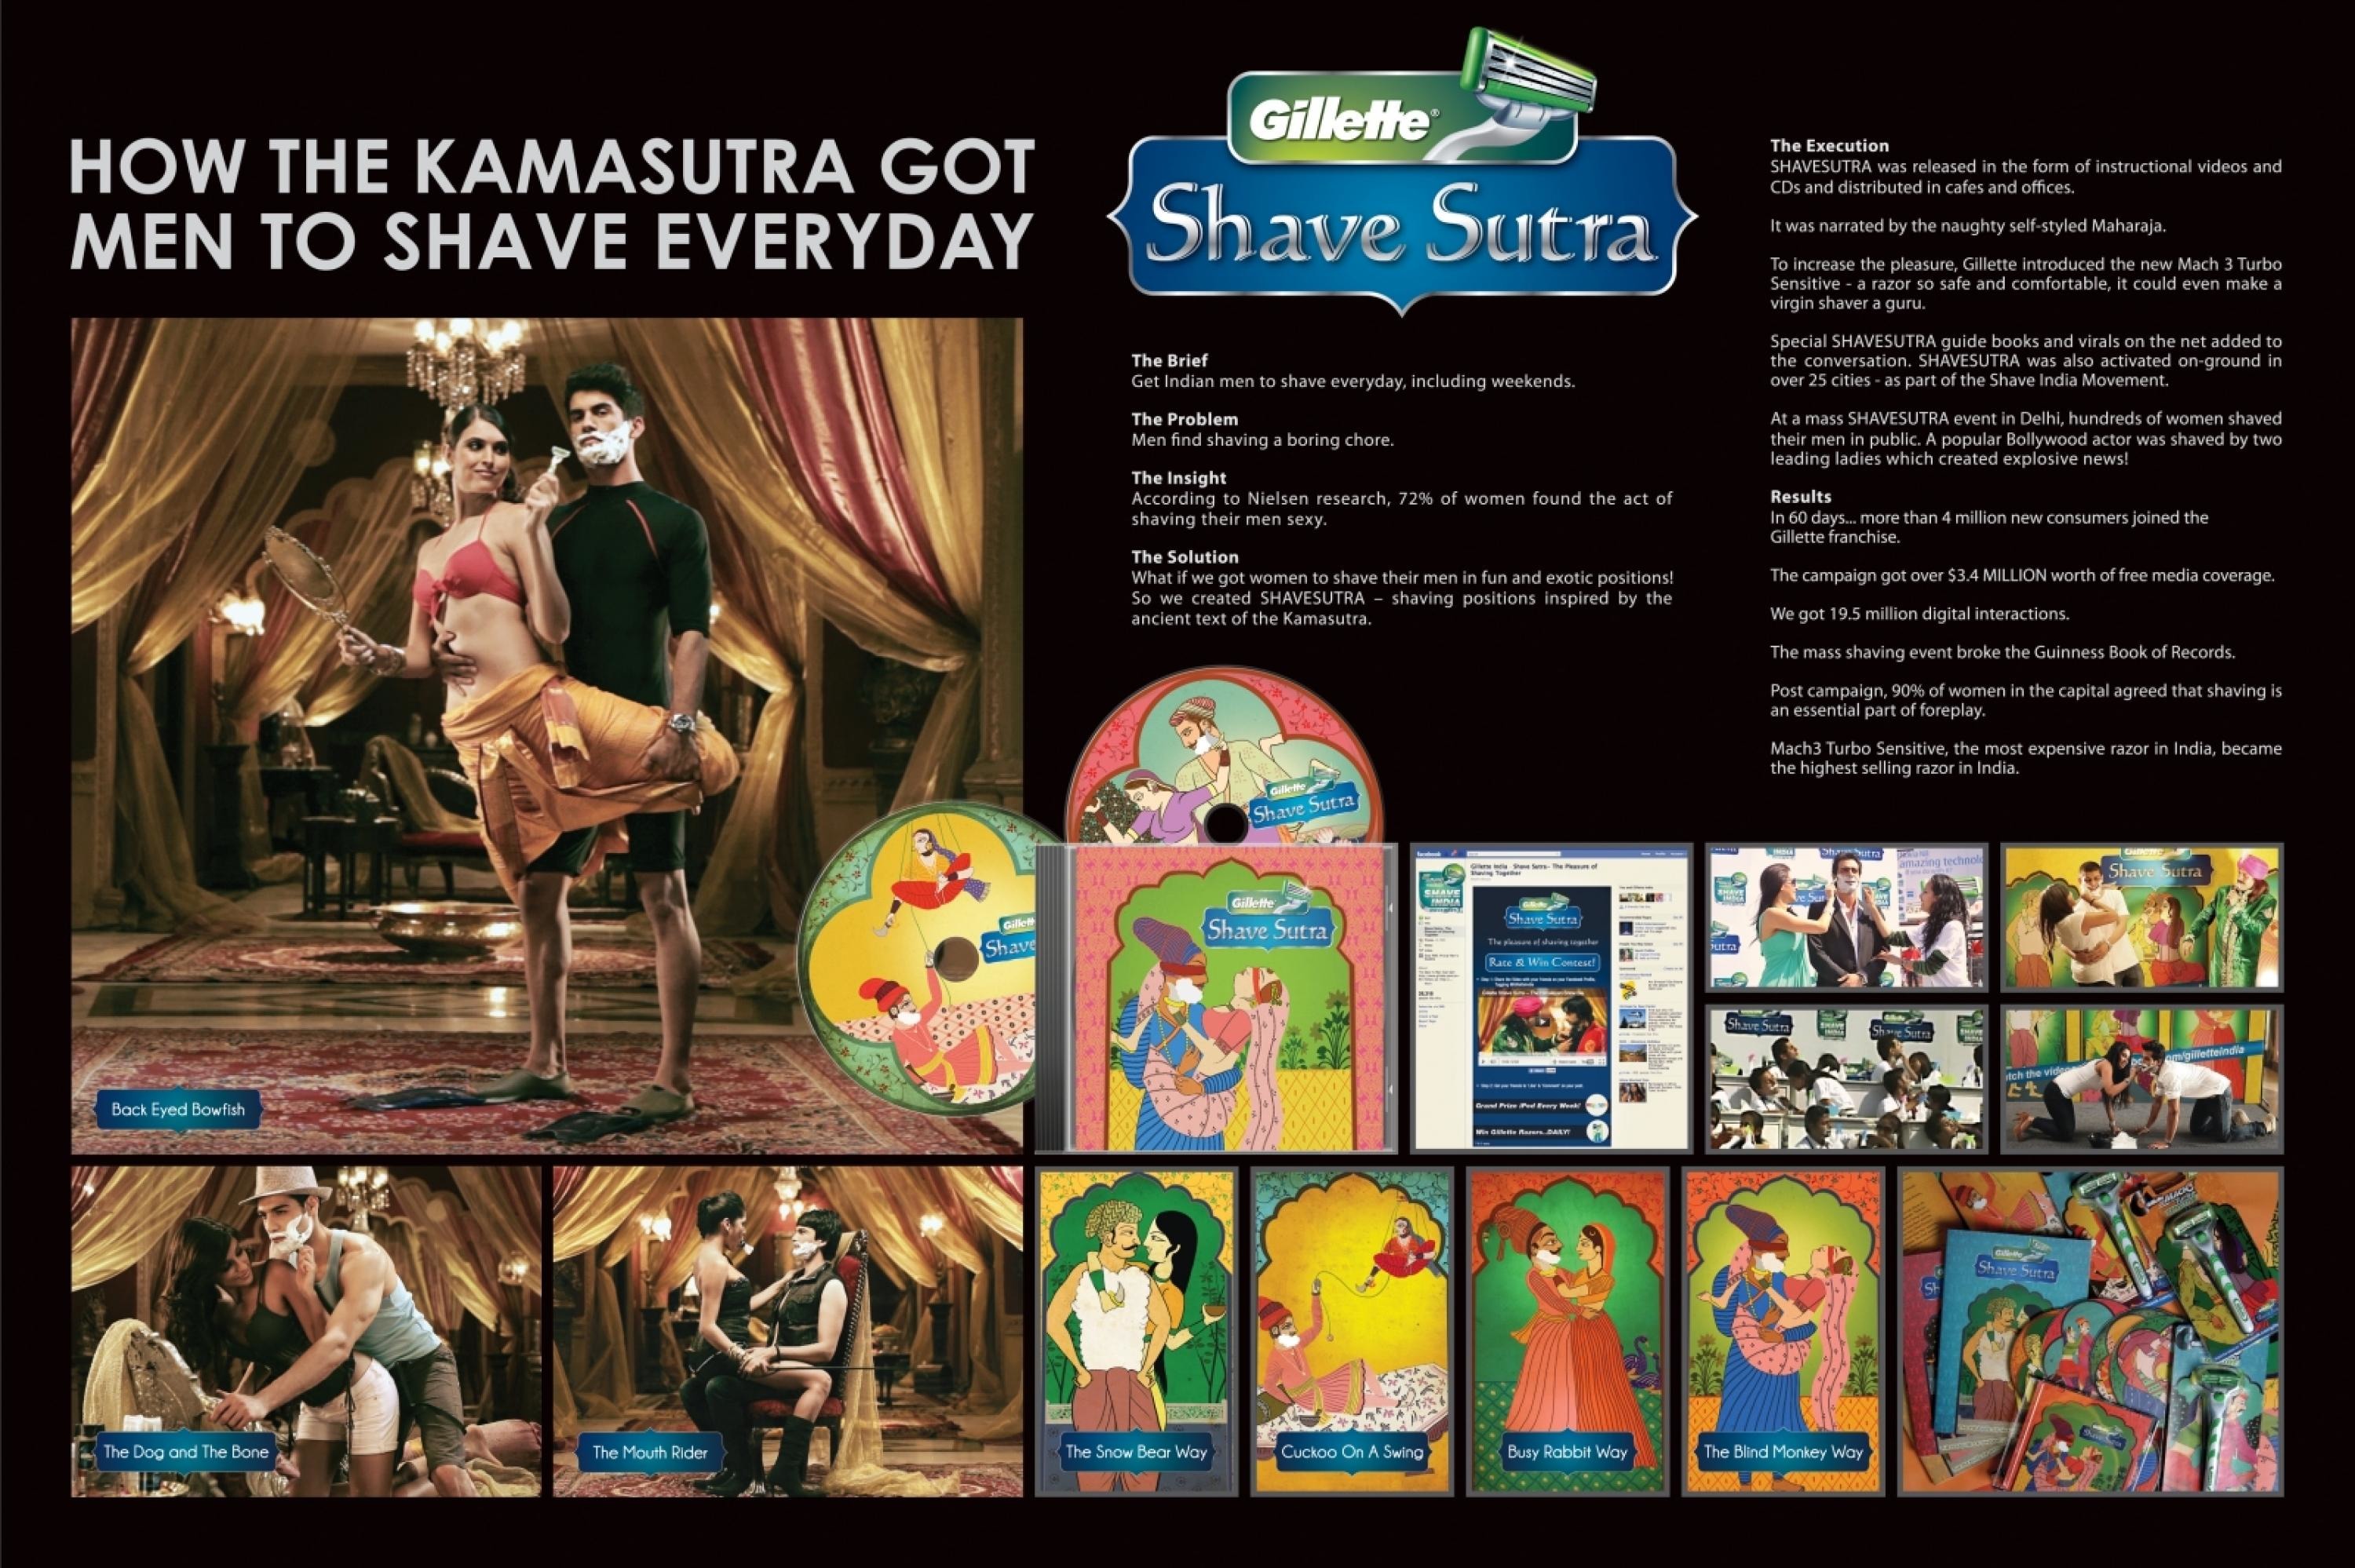 SHAVE SUTRA